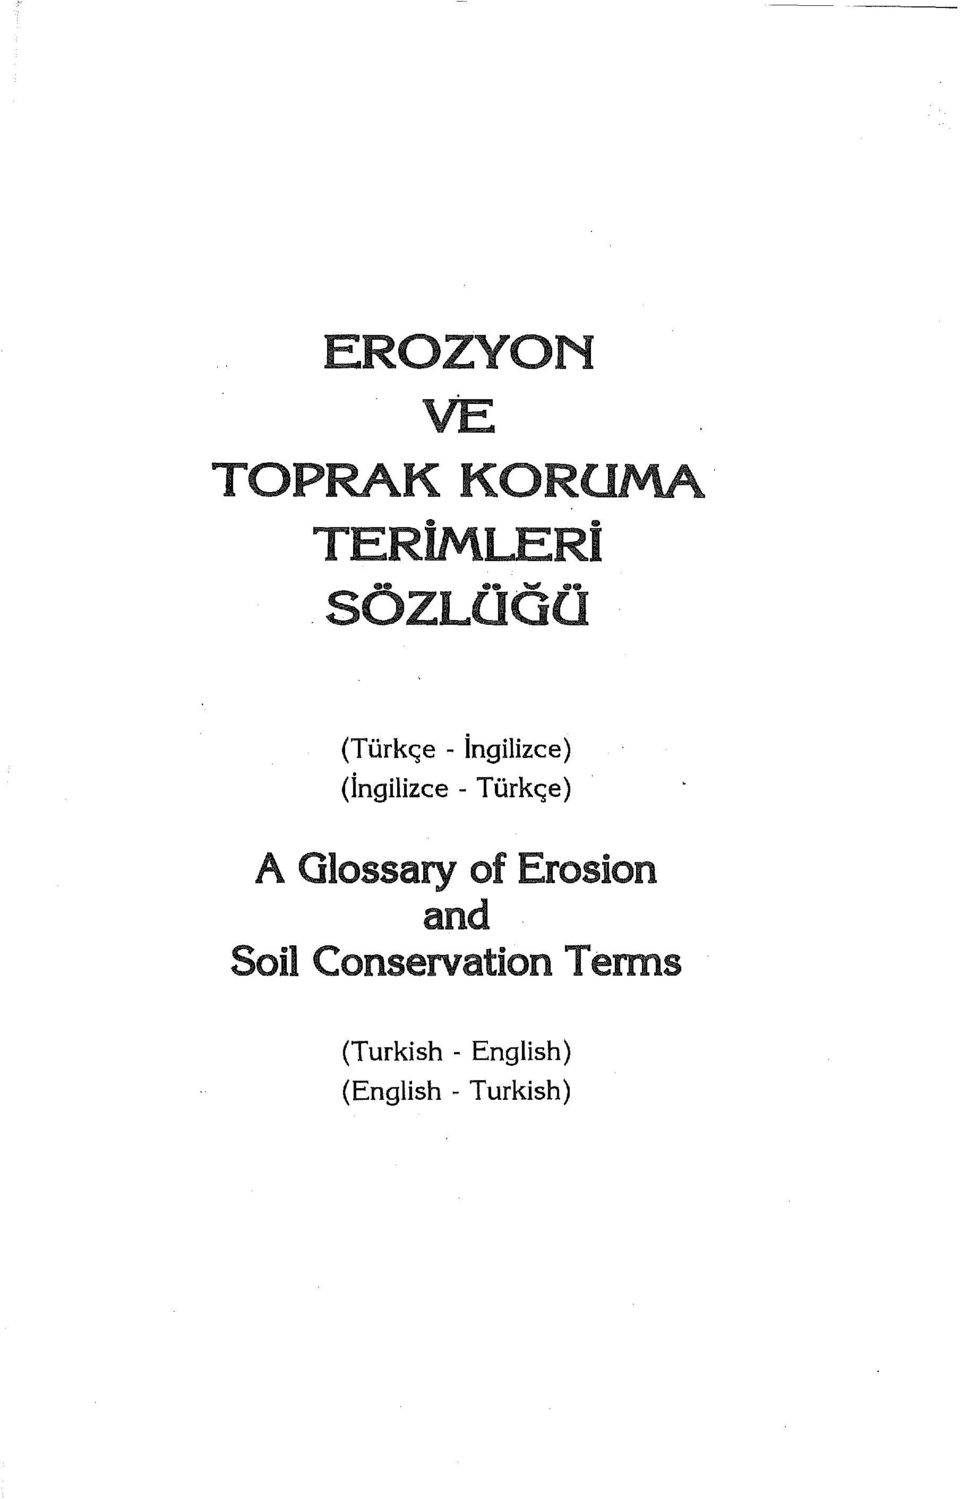 Erosion and Soil Conservation Terms